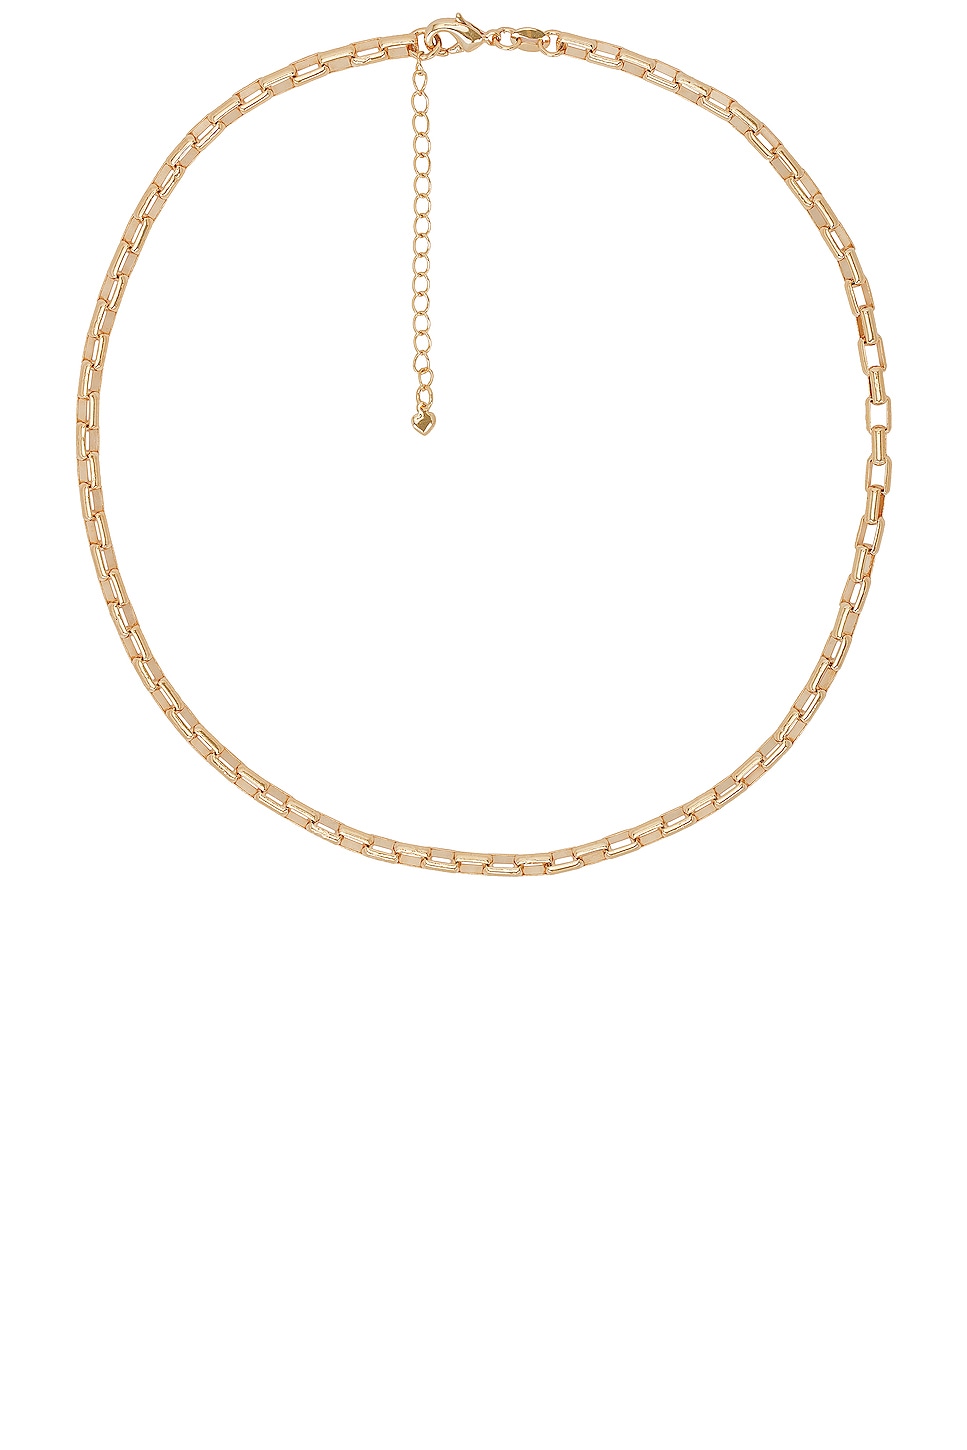 Image 1 of Jordan Road Jewelry Elongated Box Necklace in 18k Gold Plated Brass